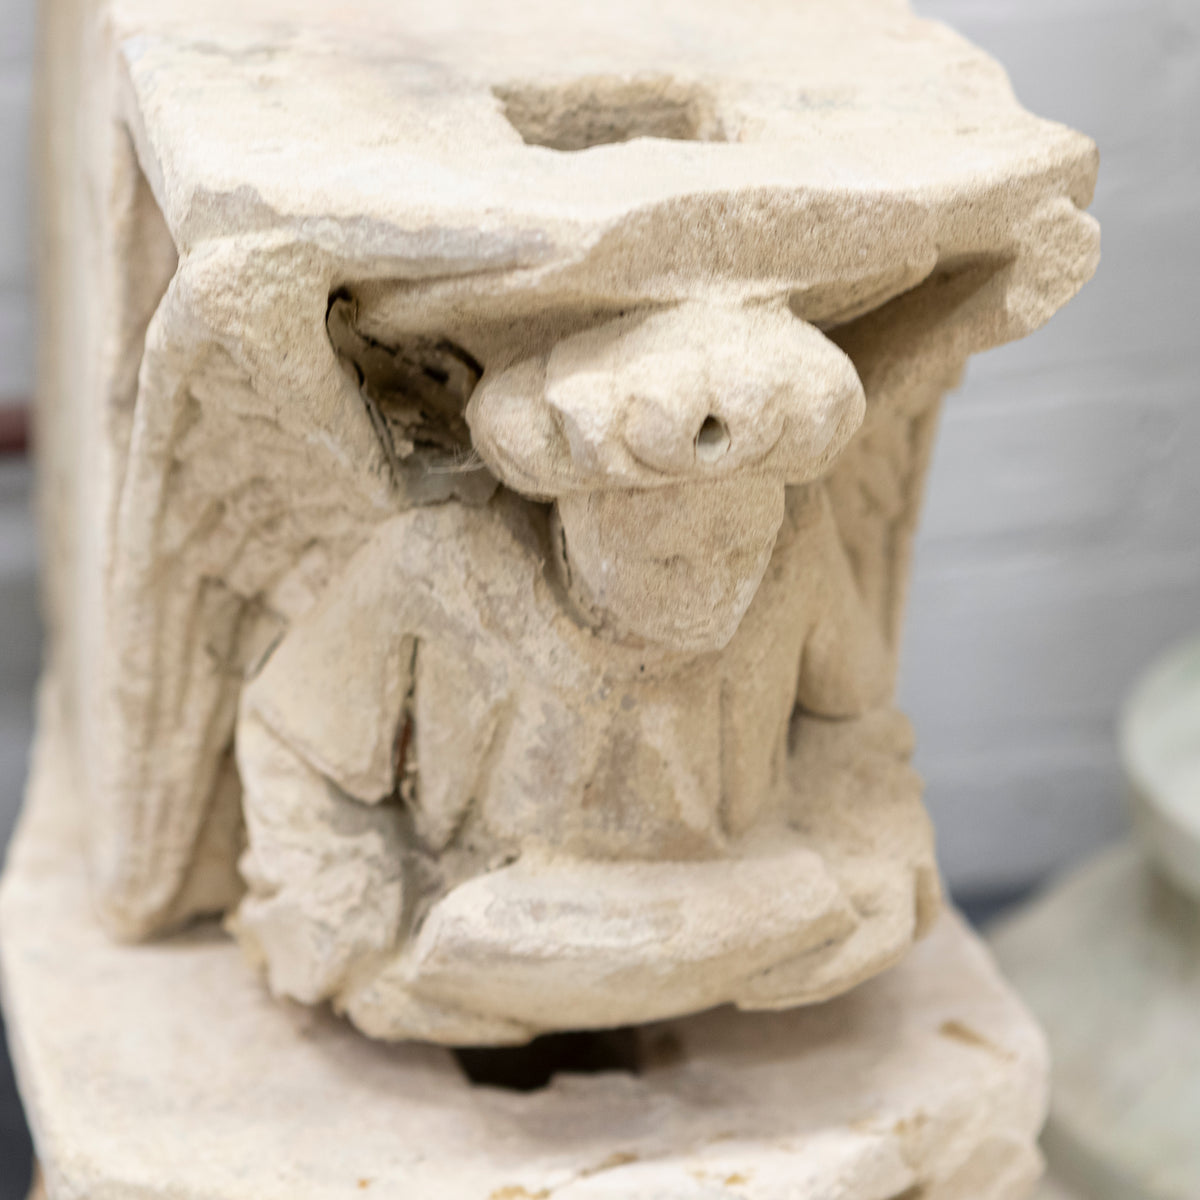 Antique Early 19th Century Carved Stone Angel Corbels | The Architectural Forum